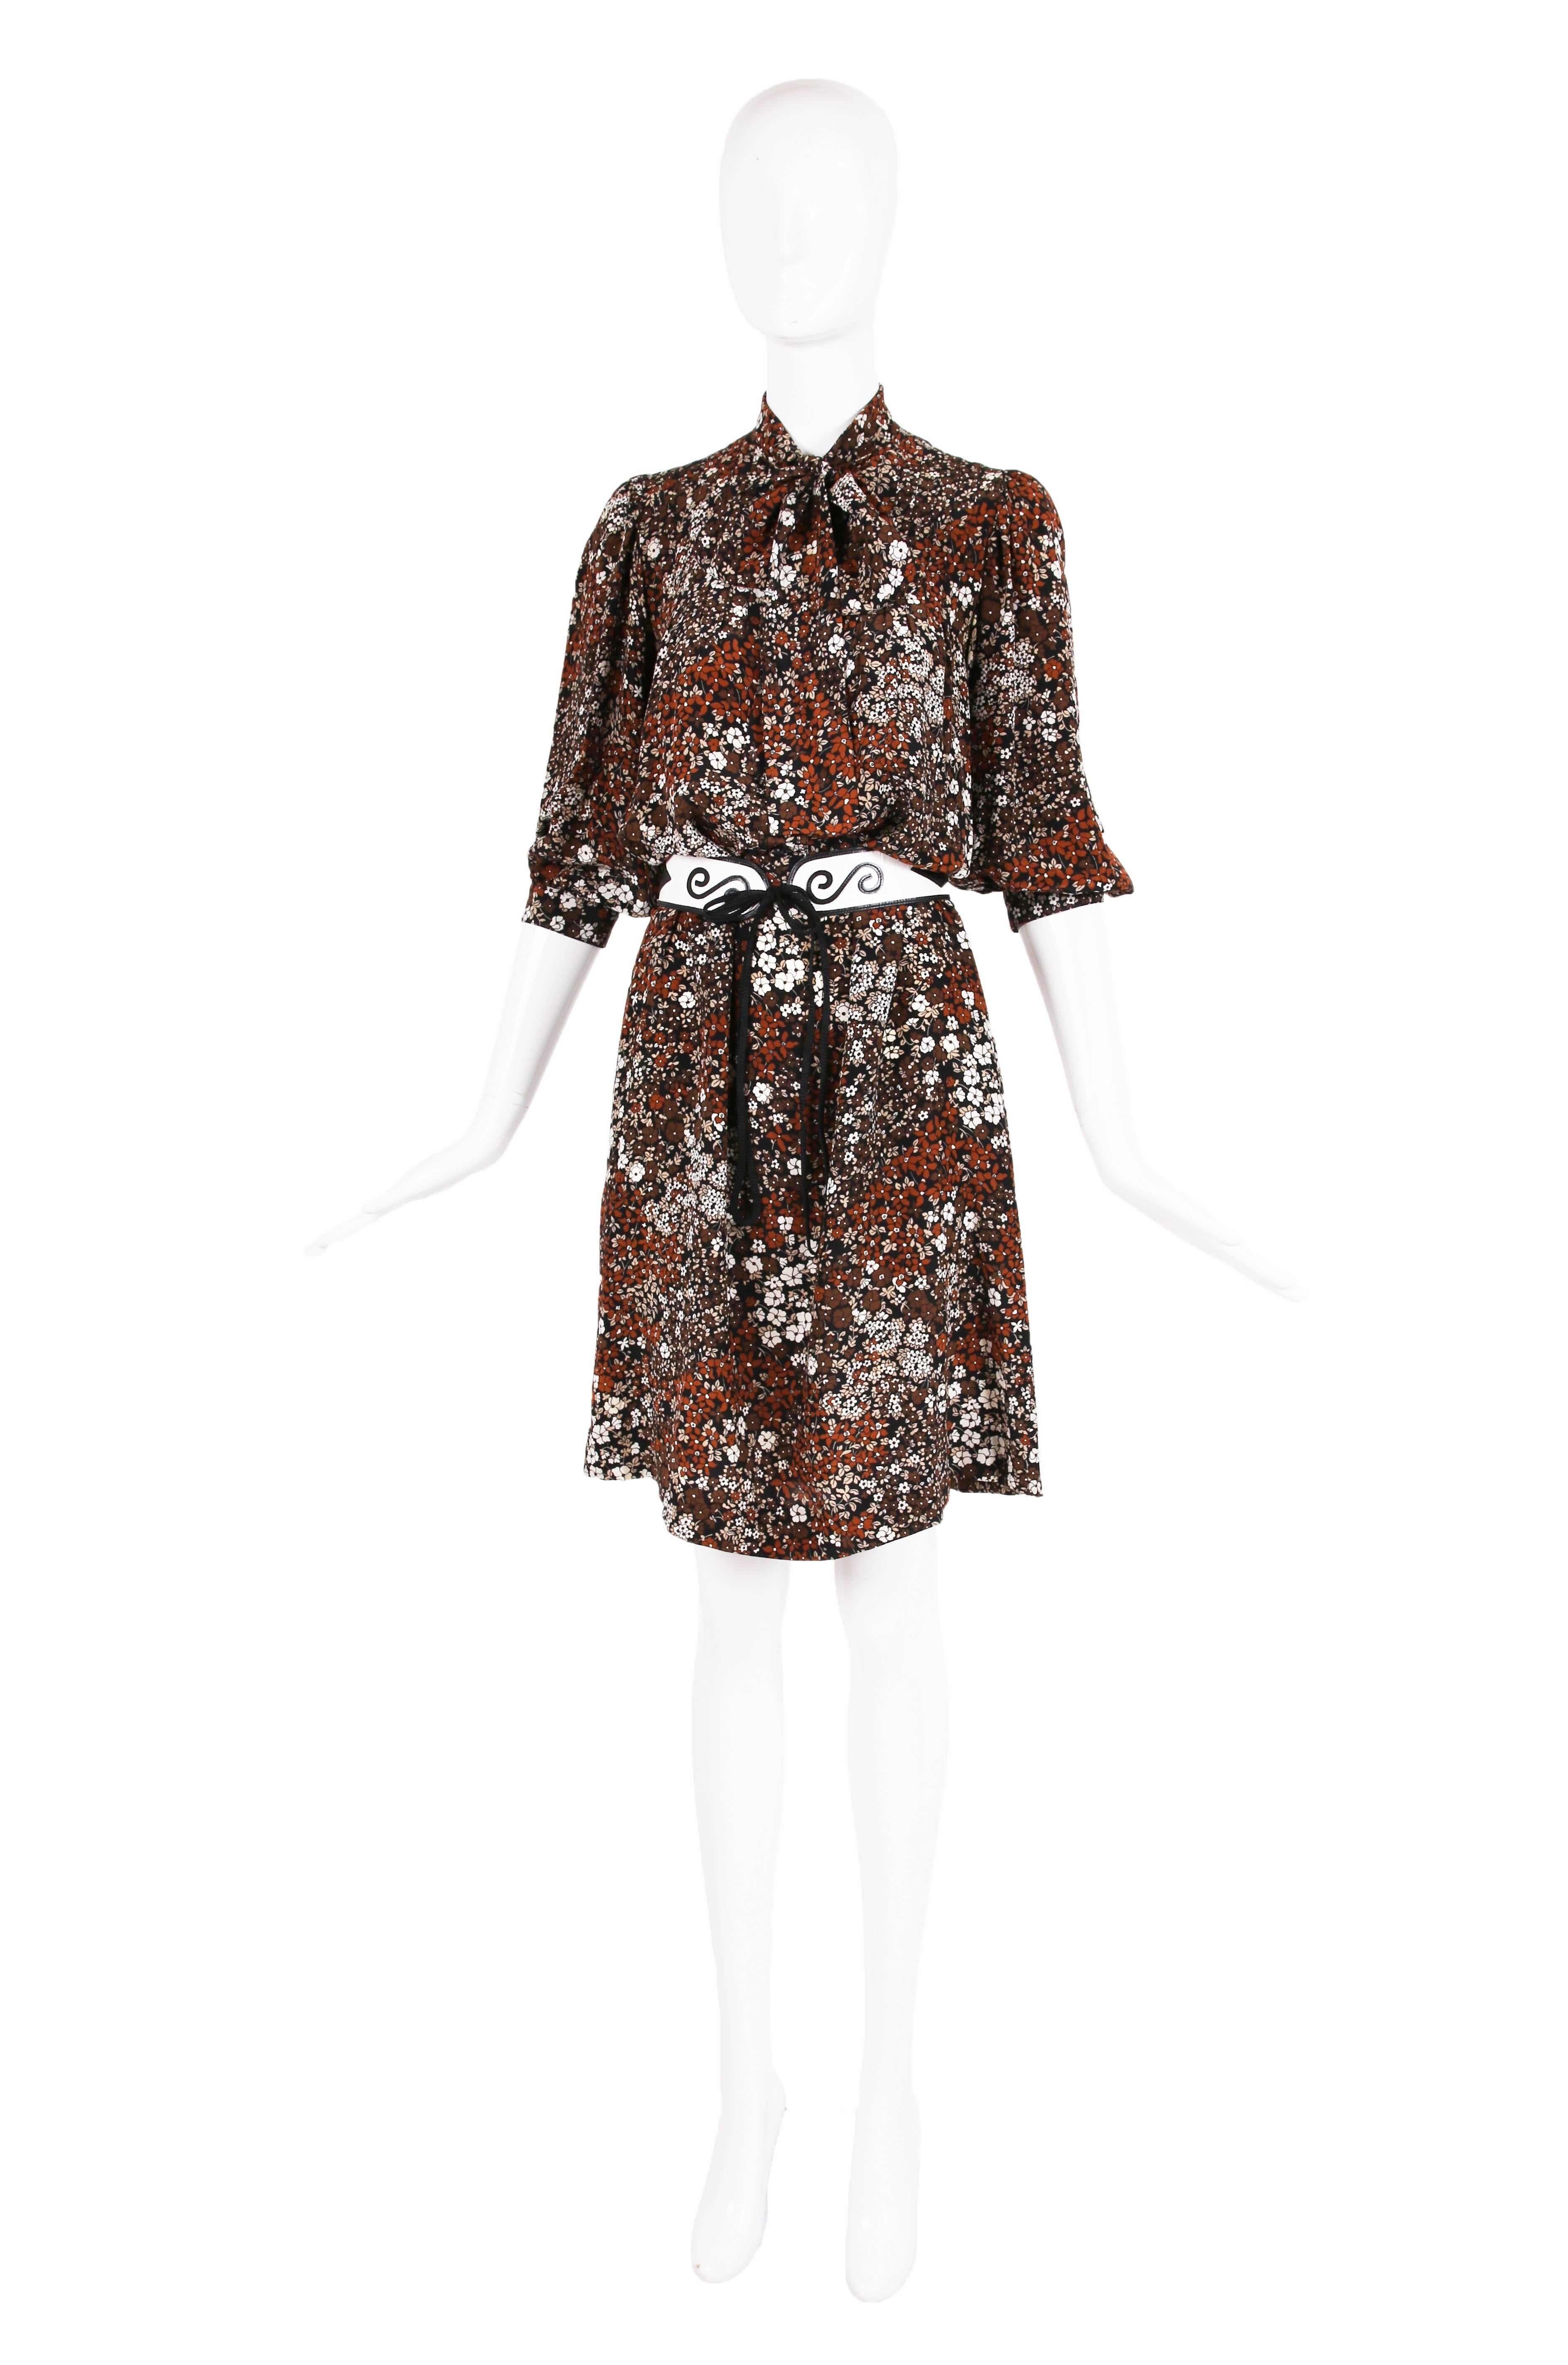 Yves Saint Laurent 1970's abstract floral 100% silk day dress in shades of brown, beige and white with pin-tucking detail at upper bodice, two frontal neck ties that tie in a bow, hidden side pockets, 3/4 sleeves and button closure at center front